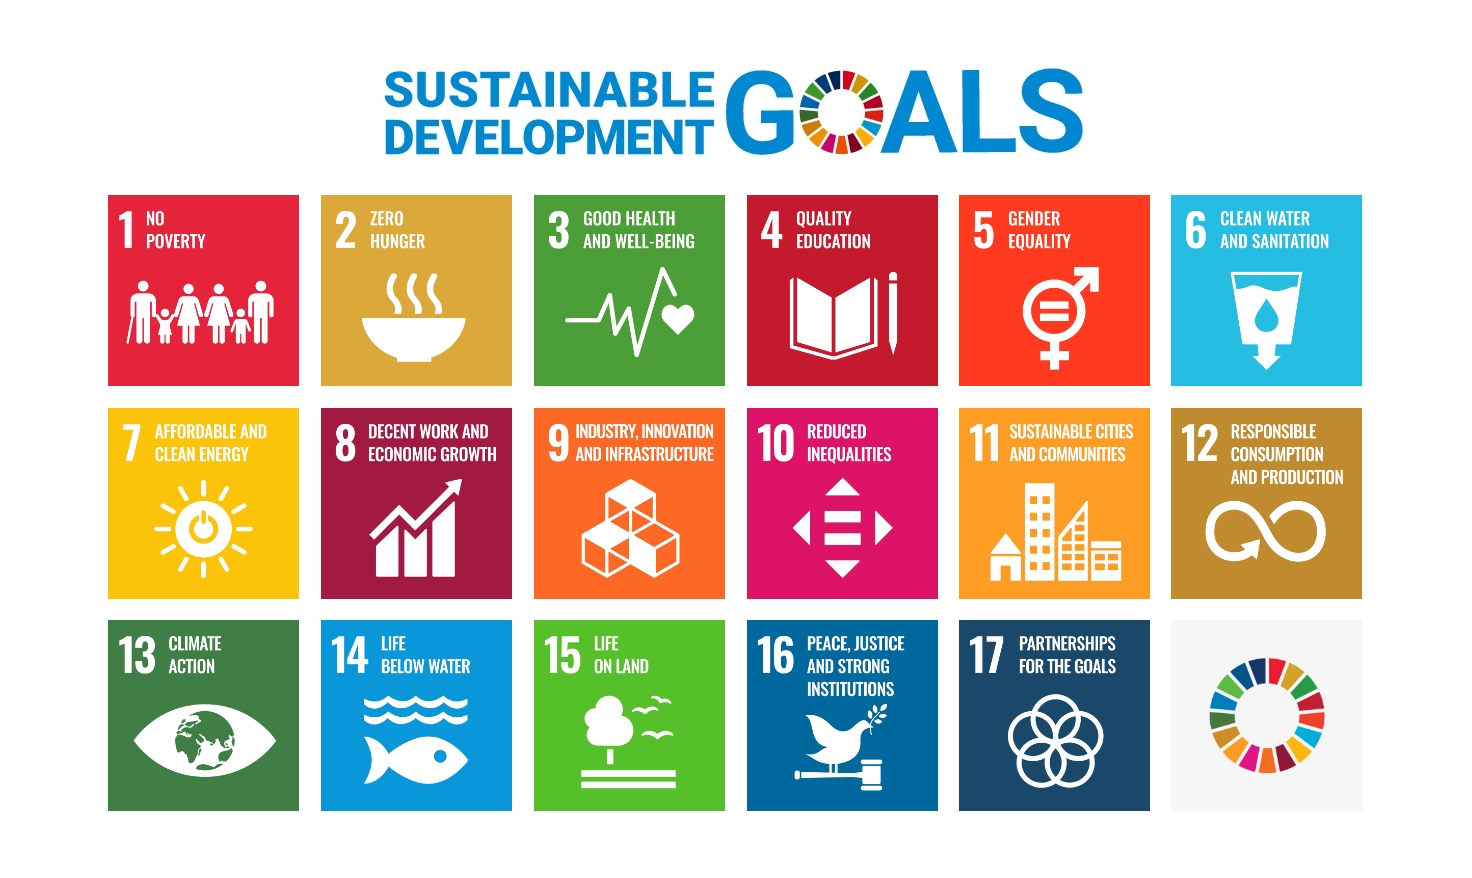 What are the SDGs?